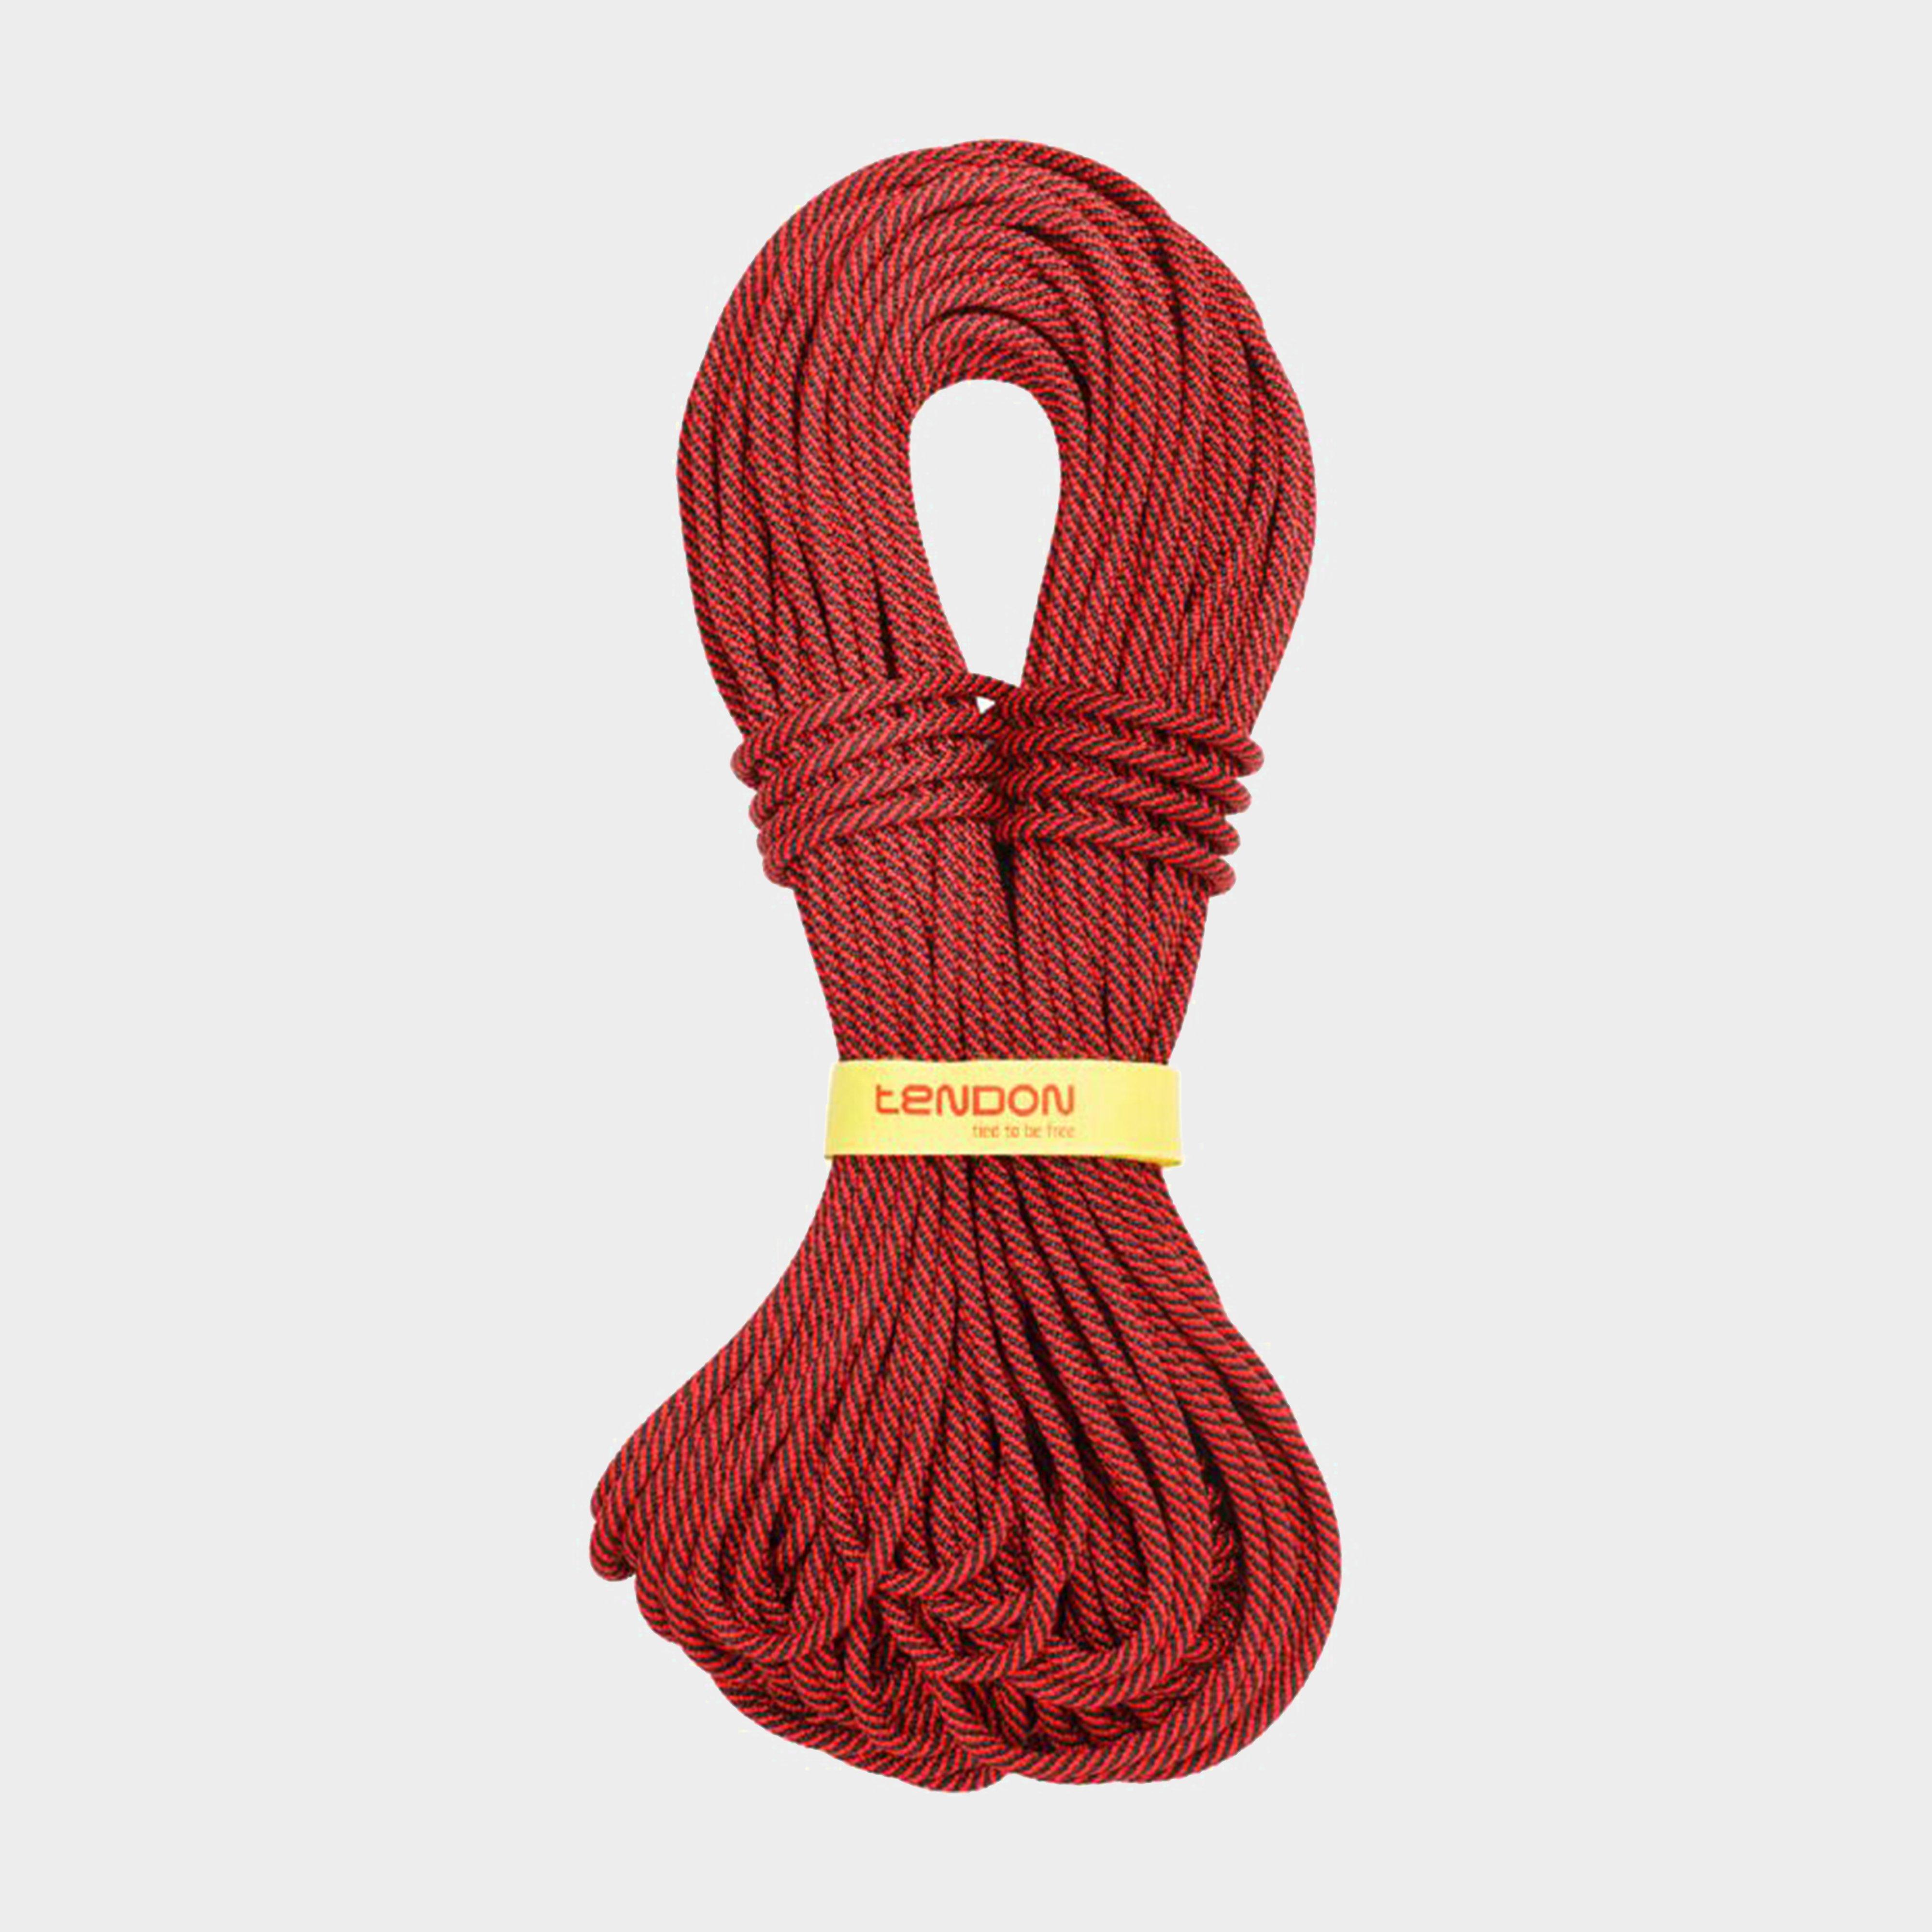  TENDON Master Rope 7.8 50m, Red